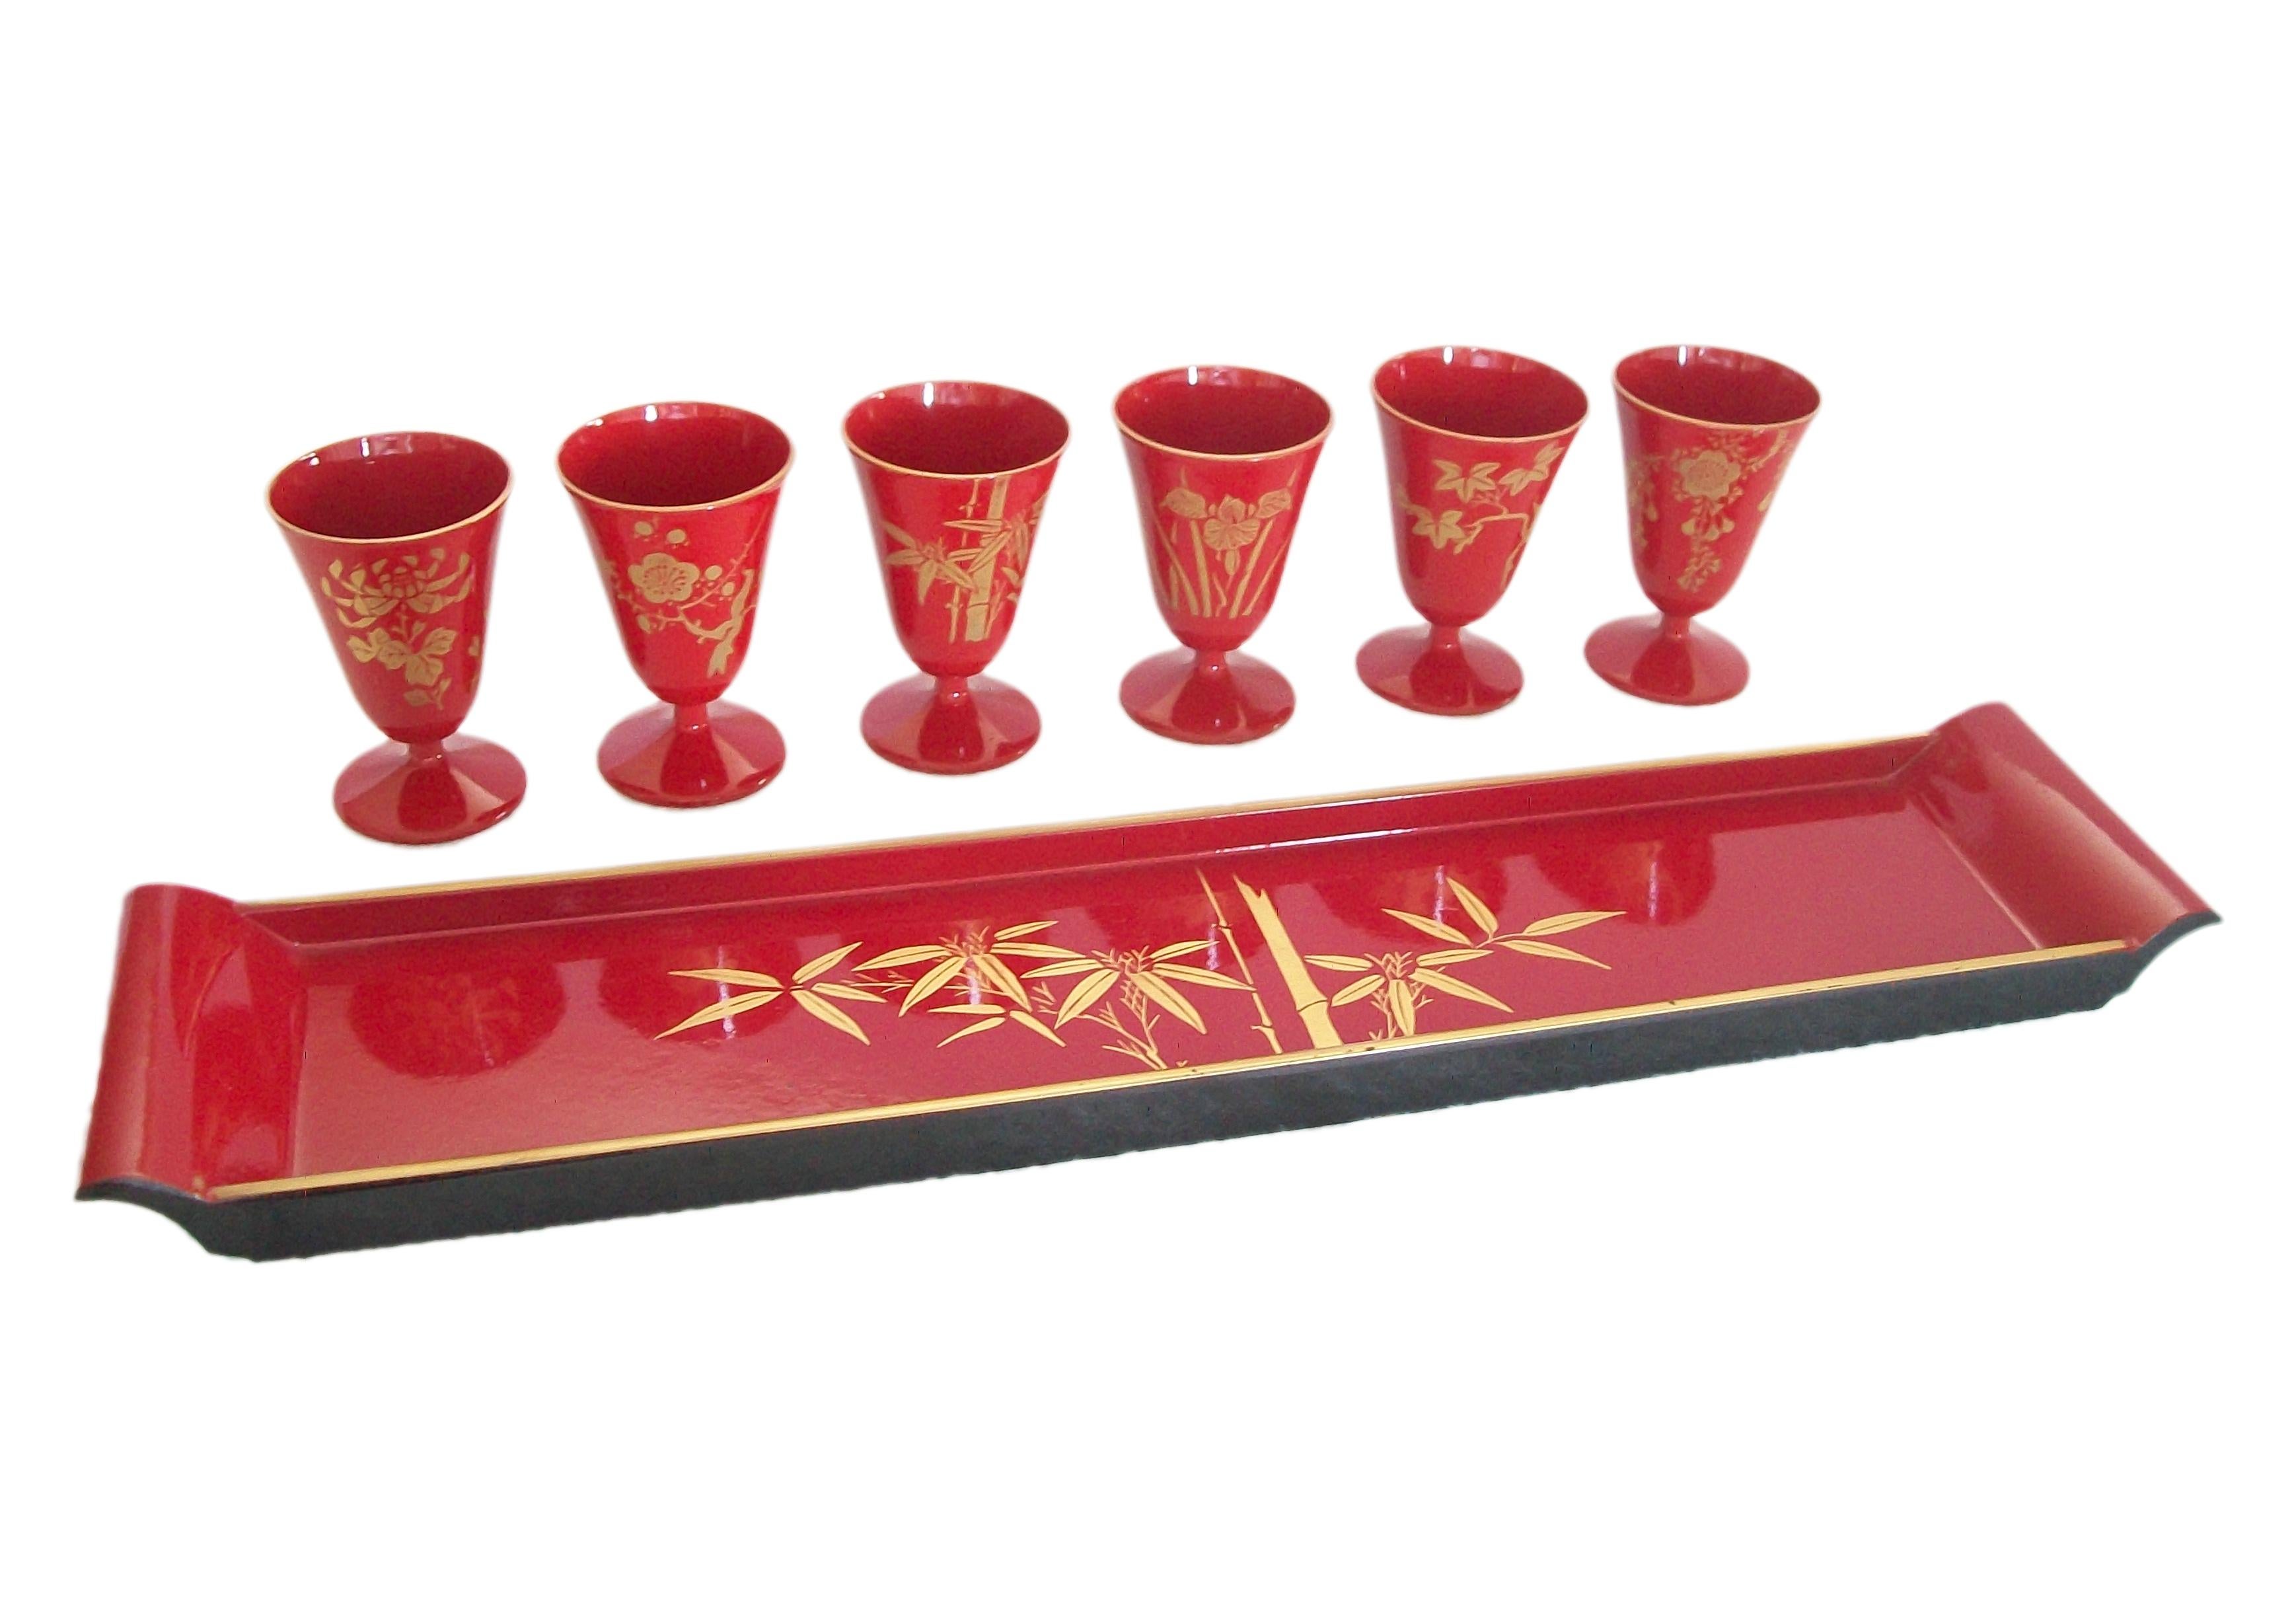 Vintage Urushi red lacquer tray with six stemmed cups - each cup gilt decorated with a different floral, leaf or bamboo specimen - the tray gilt decorated with bamboo to the center, the underside black lacquer - makers label to the outside of the